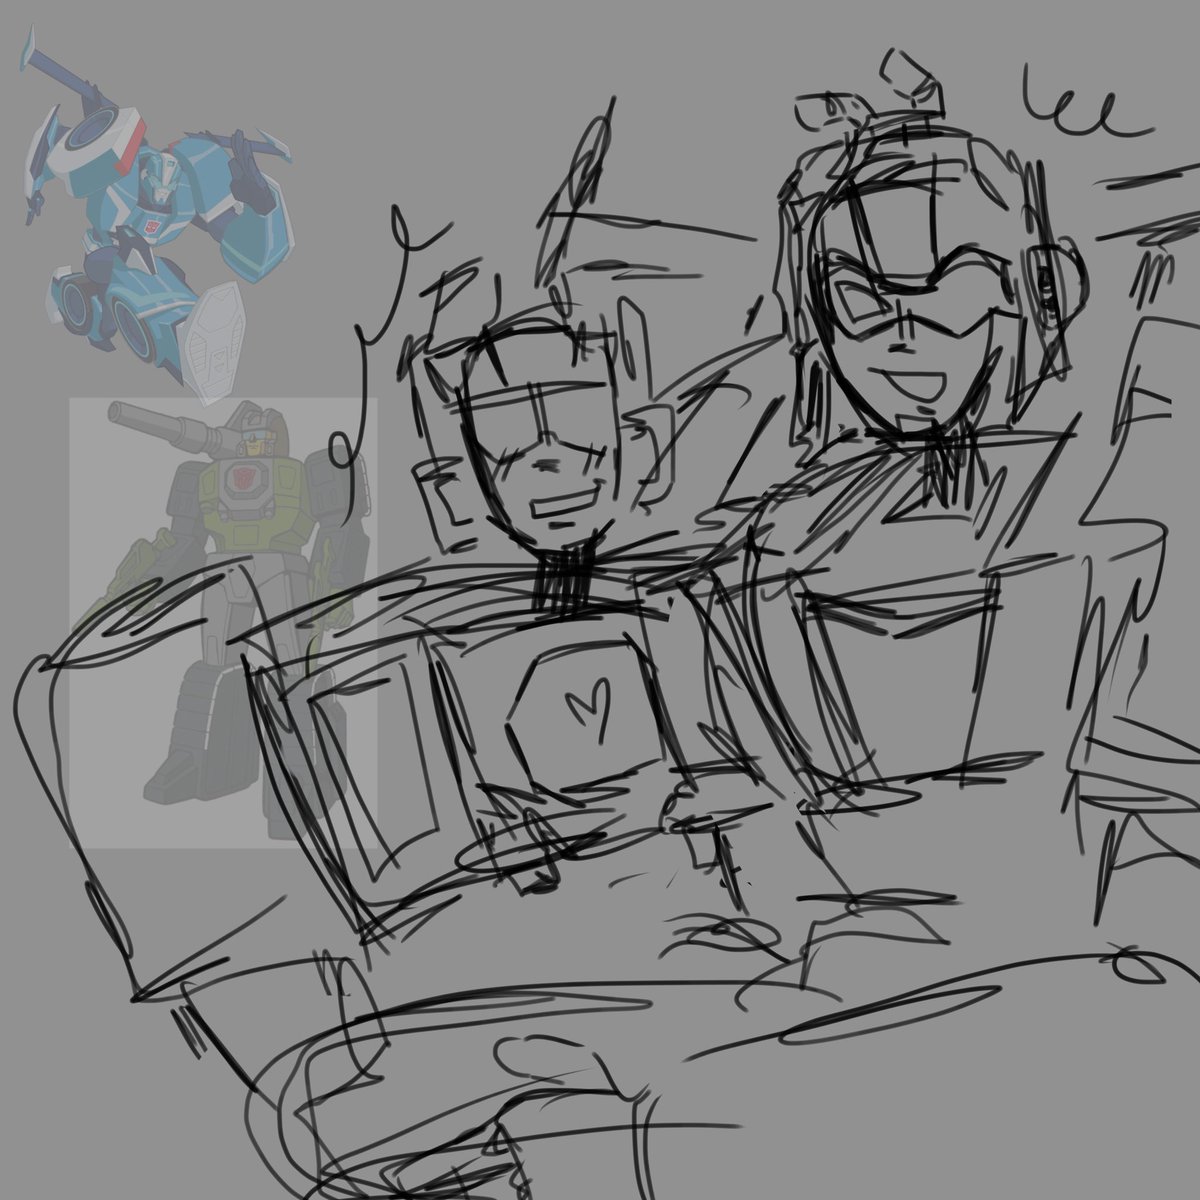 IM FINALLY OUT OF TWITTER JAIL HERES MORE BLURRHEAD #transformers